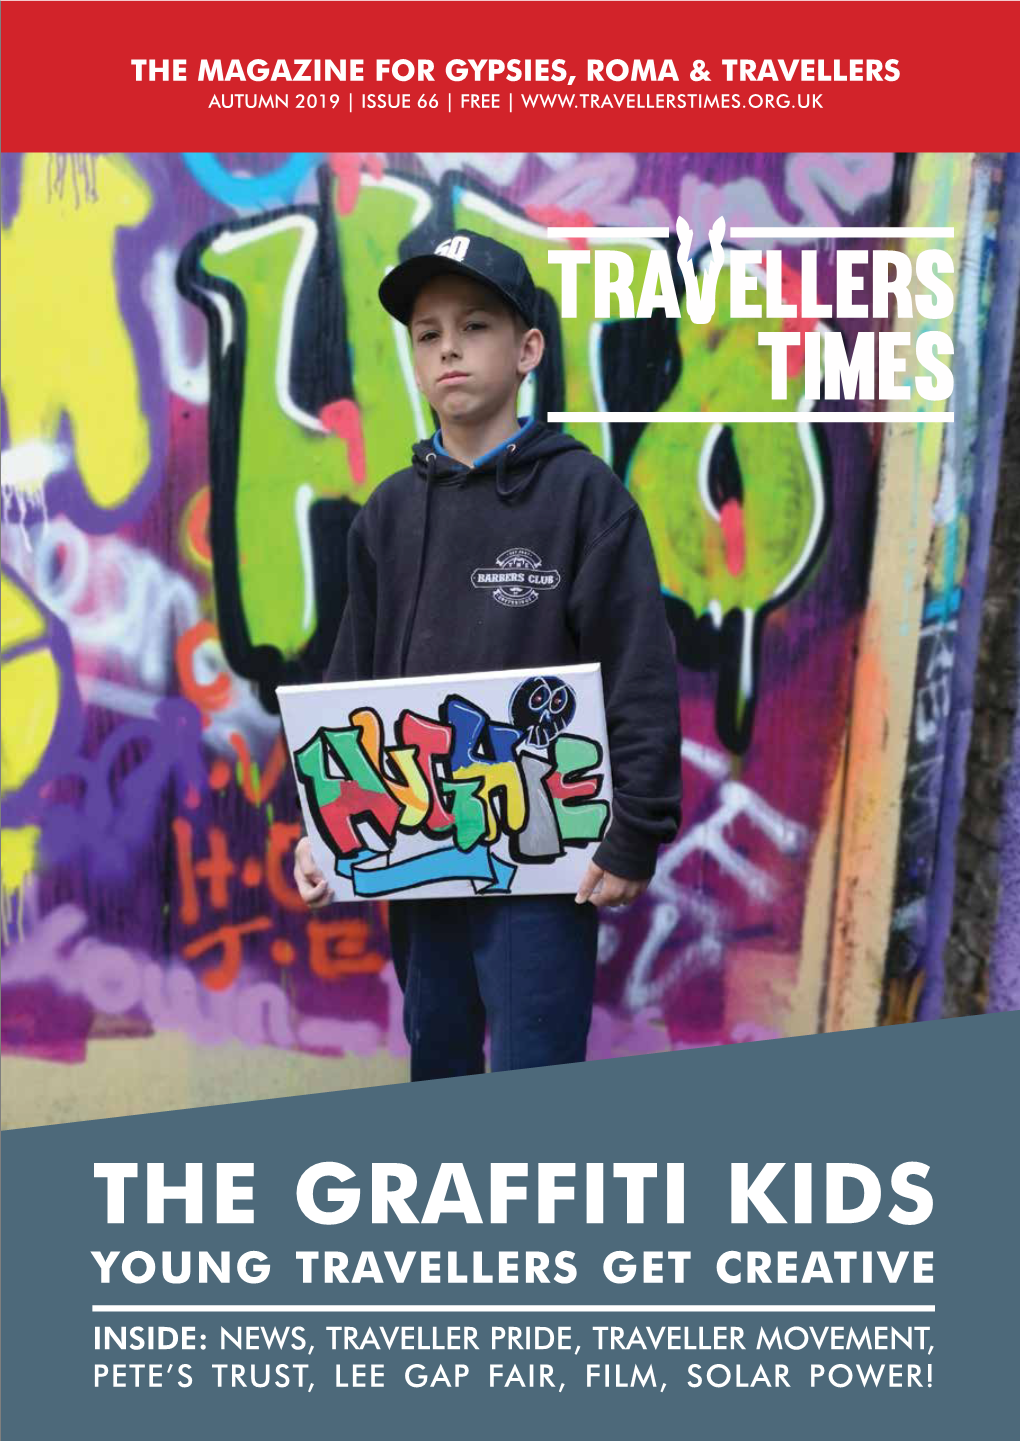 The Graffiti Kids Young Travellers Get Creative